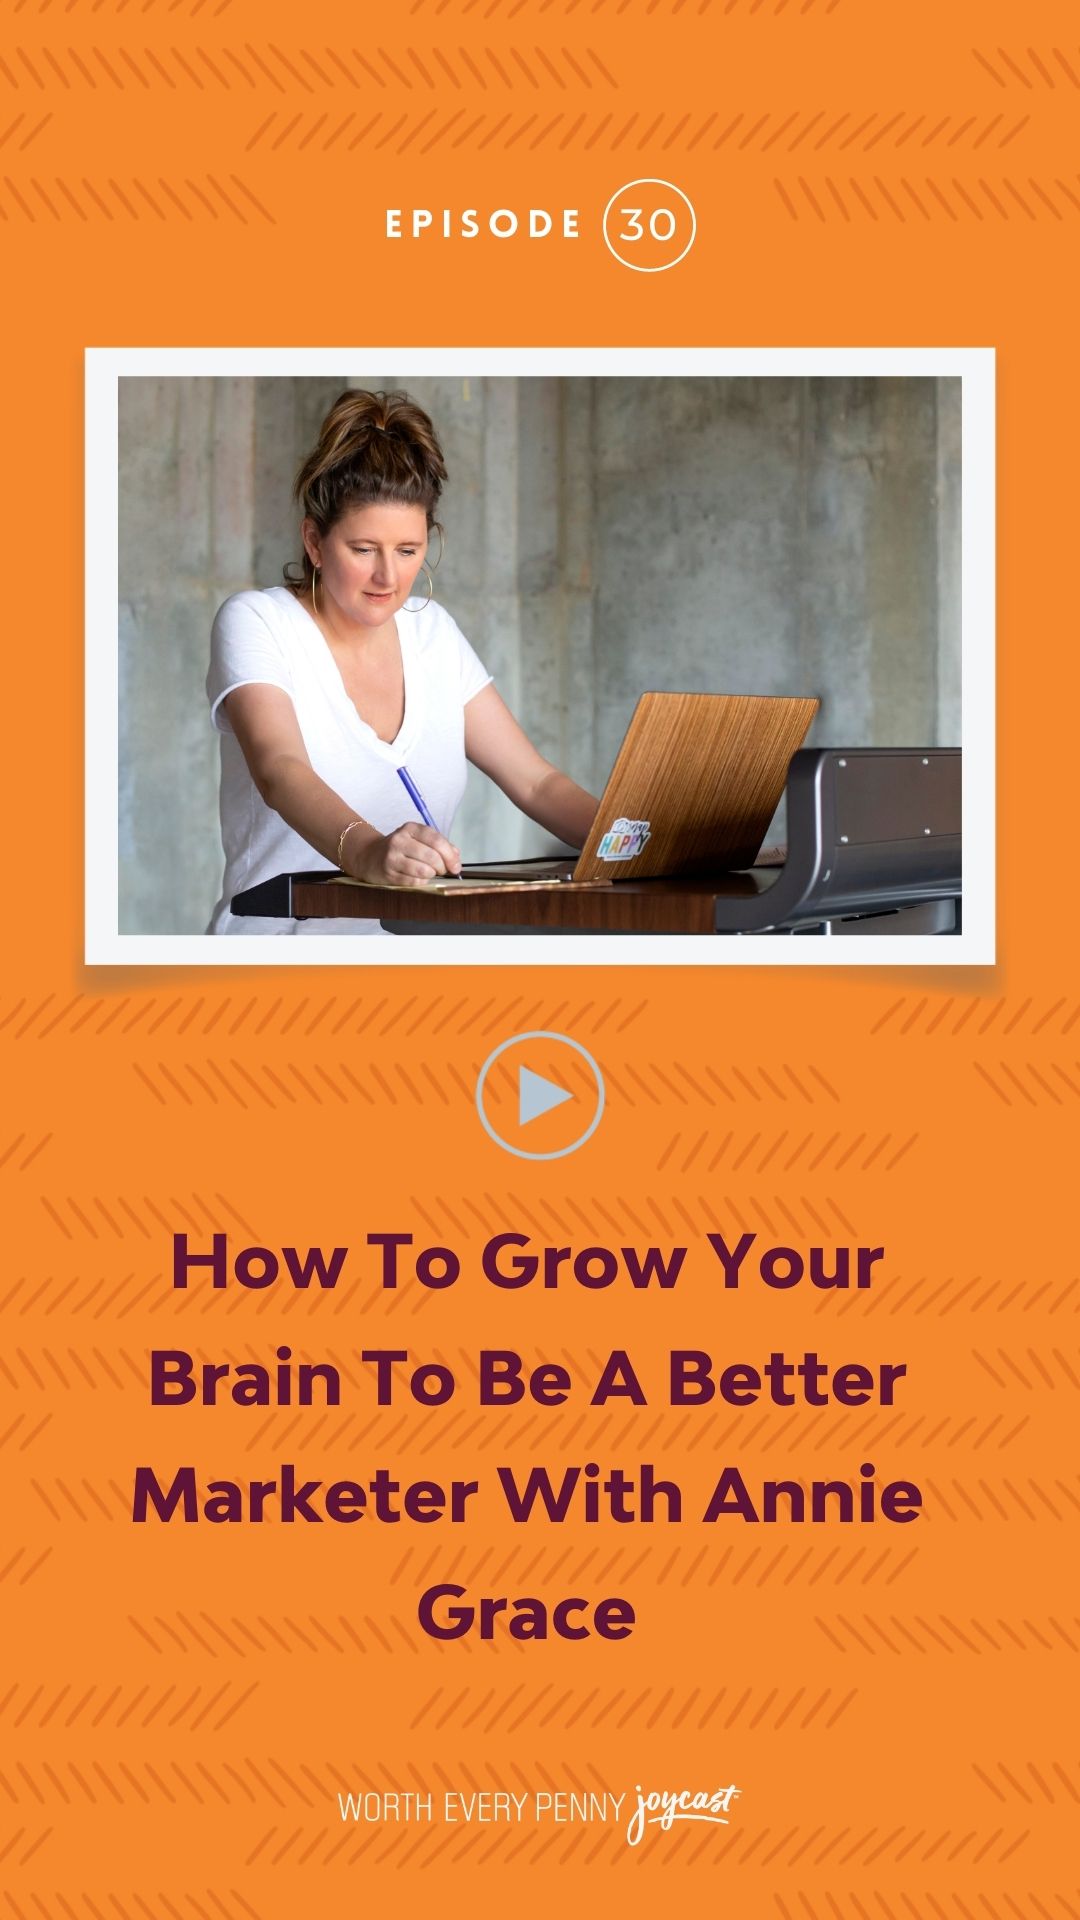 Episode 30: How to Grow Your Brain to Be A Better Marketer with Annie Grace